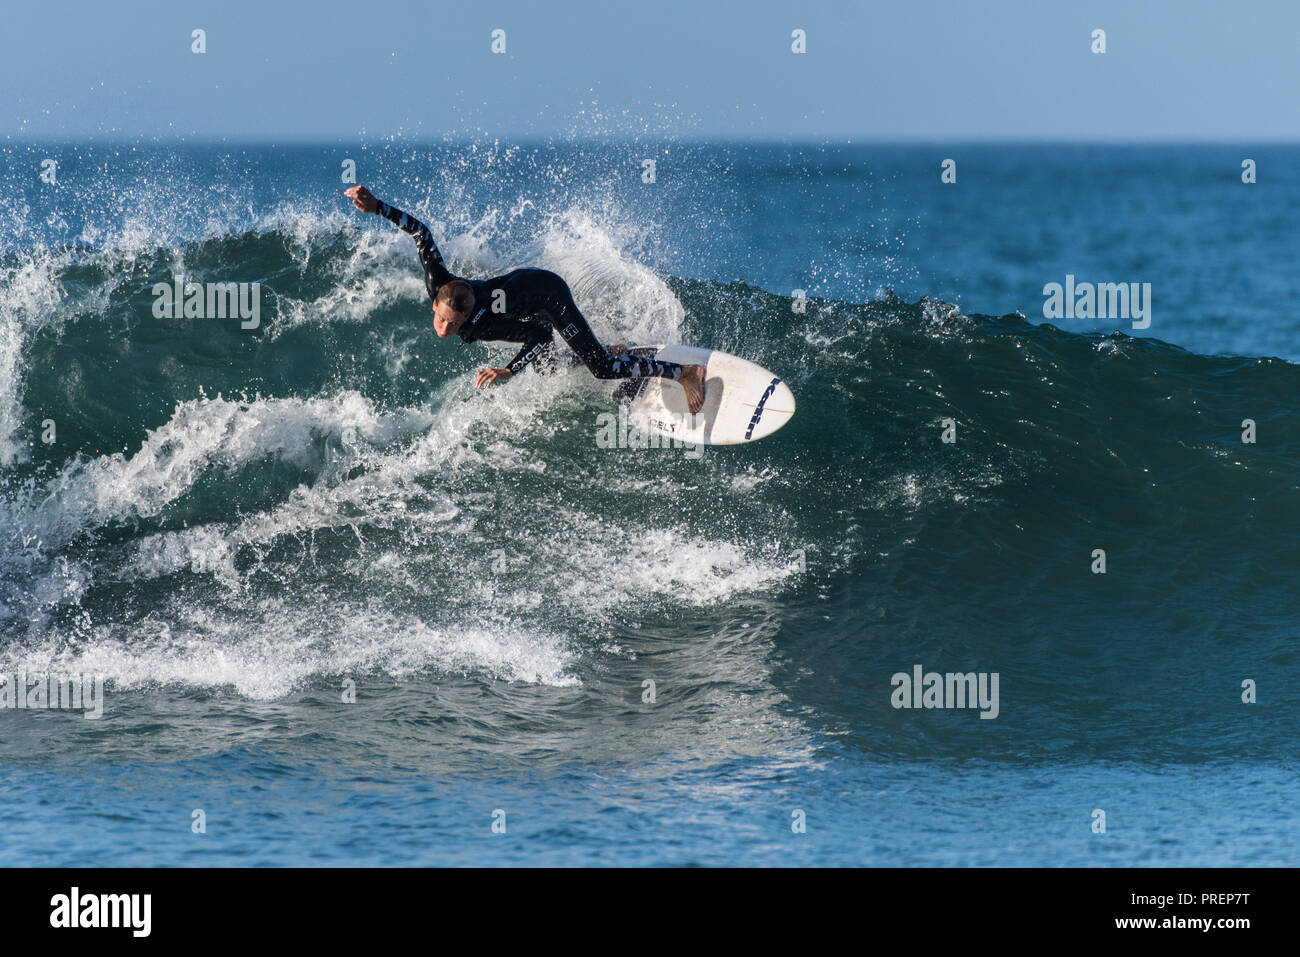 Surfer in black wetsuit ftakes a big and sweeping turn at Surfer's Knoll, Ventura, California on October 1, 2018. Stock Photo